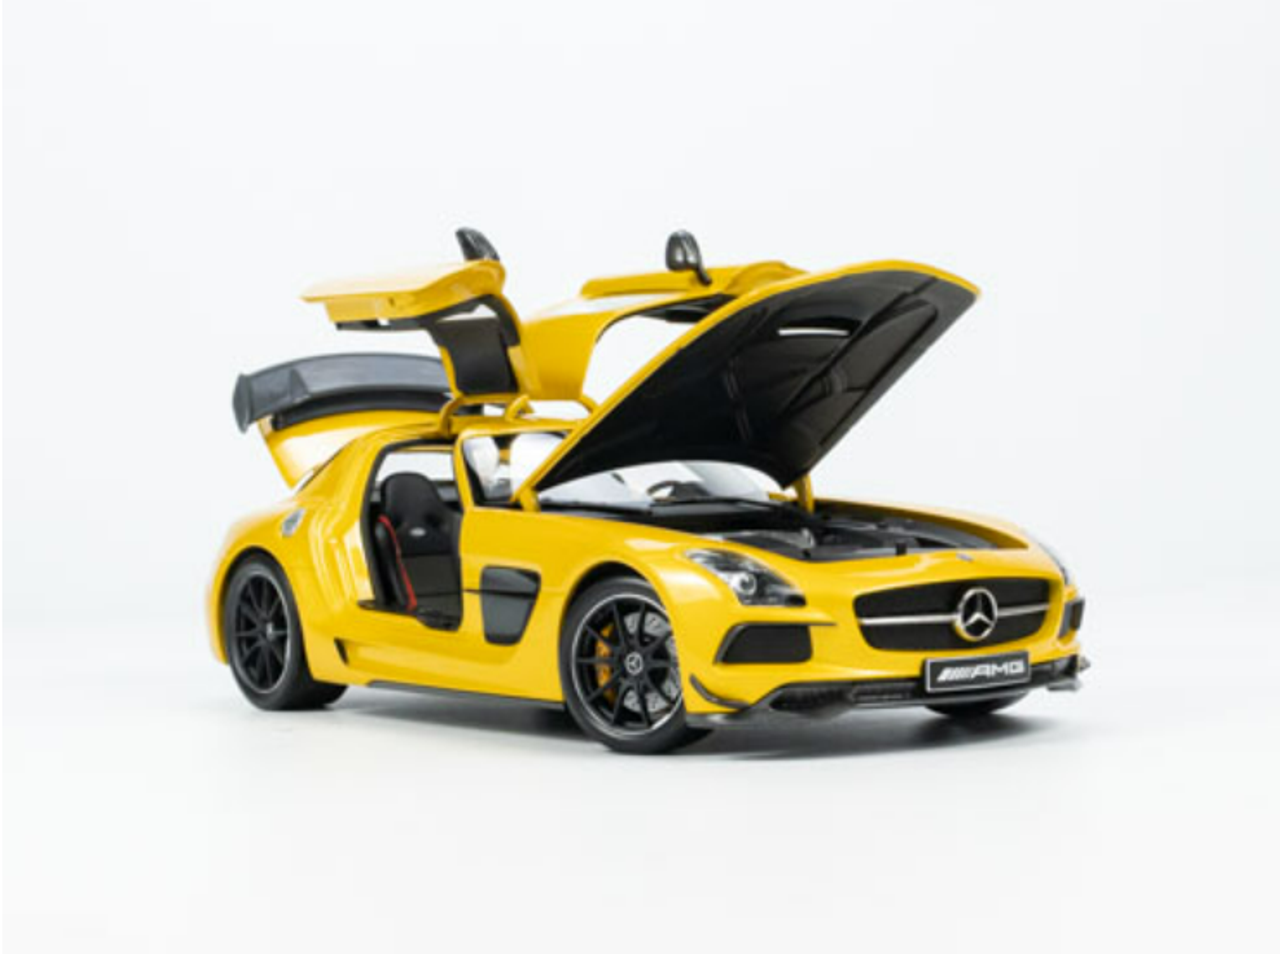 Mercedes miniatures win eight categories in readers' poll: Mercedes-Benz  SLS AMG 1:12 voted Super Model Vehicle Of The Year 2011